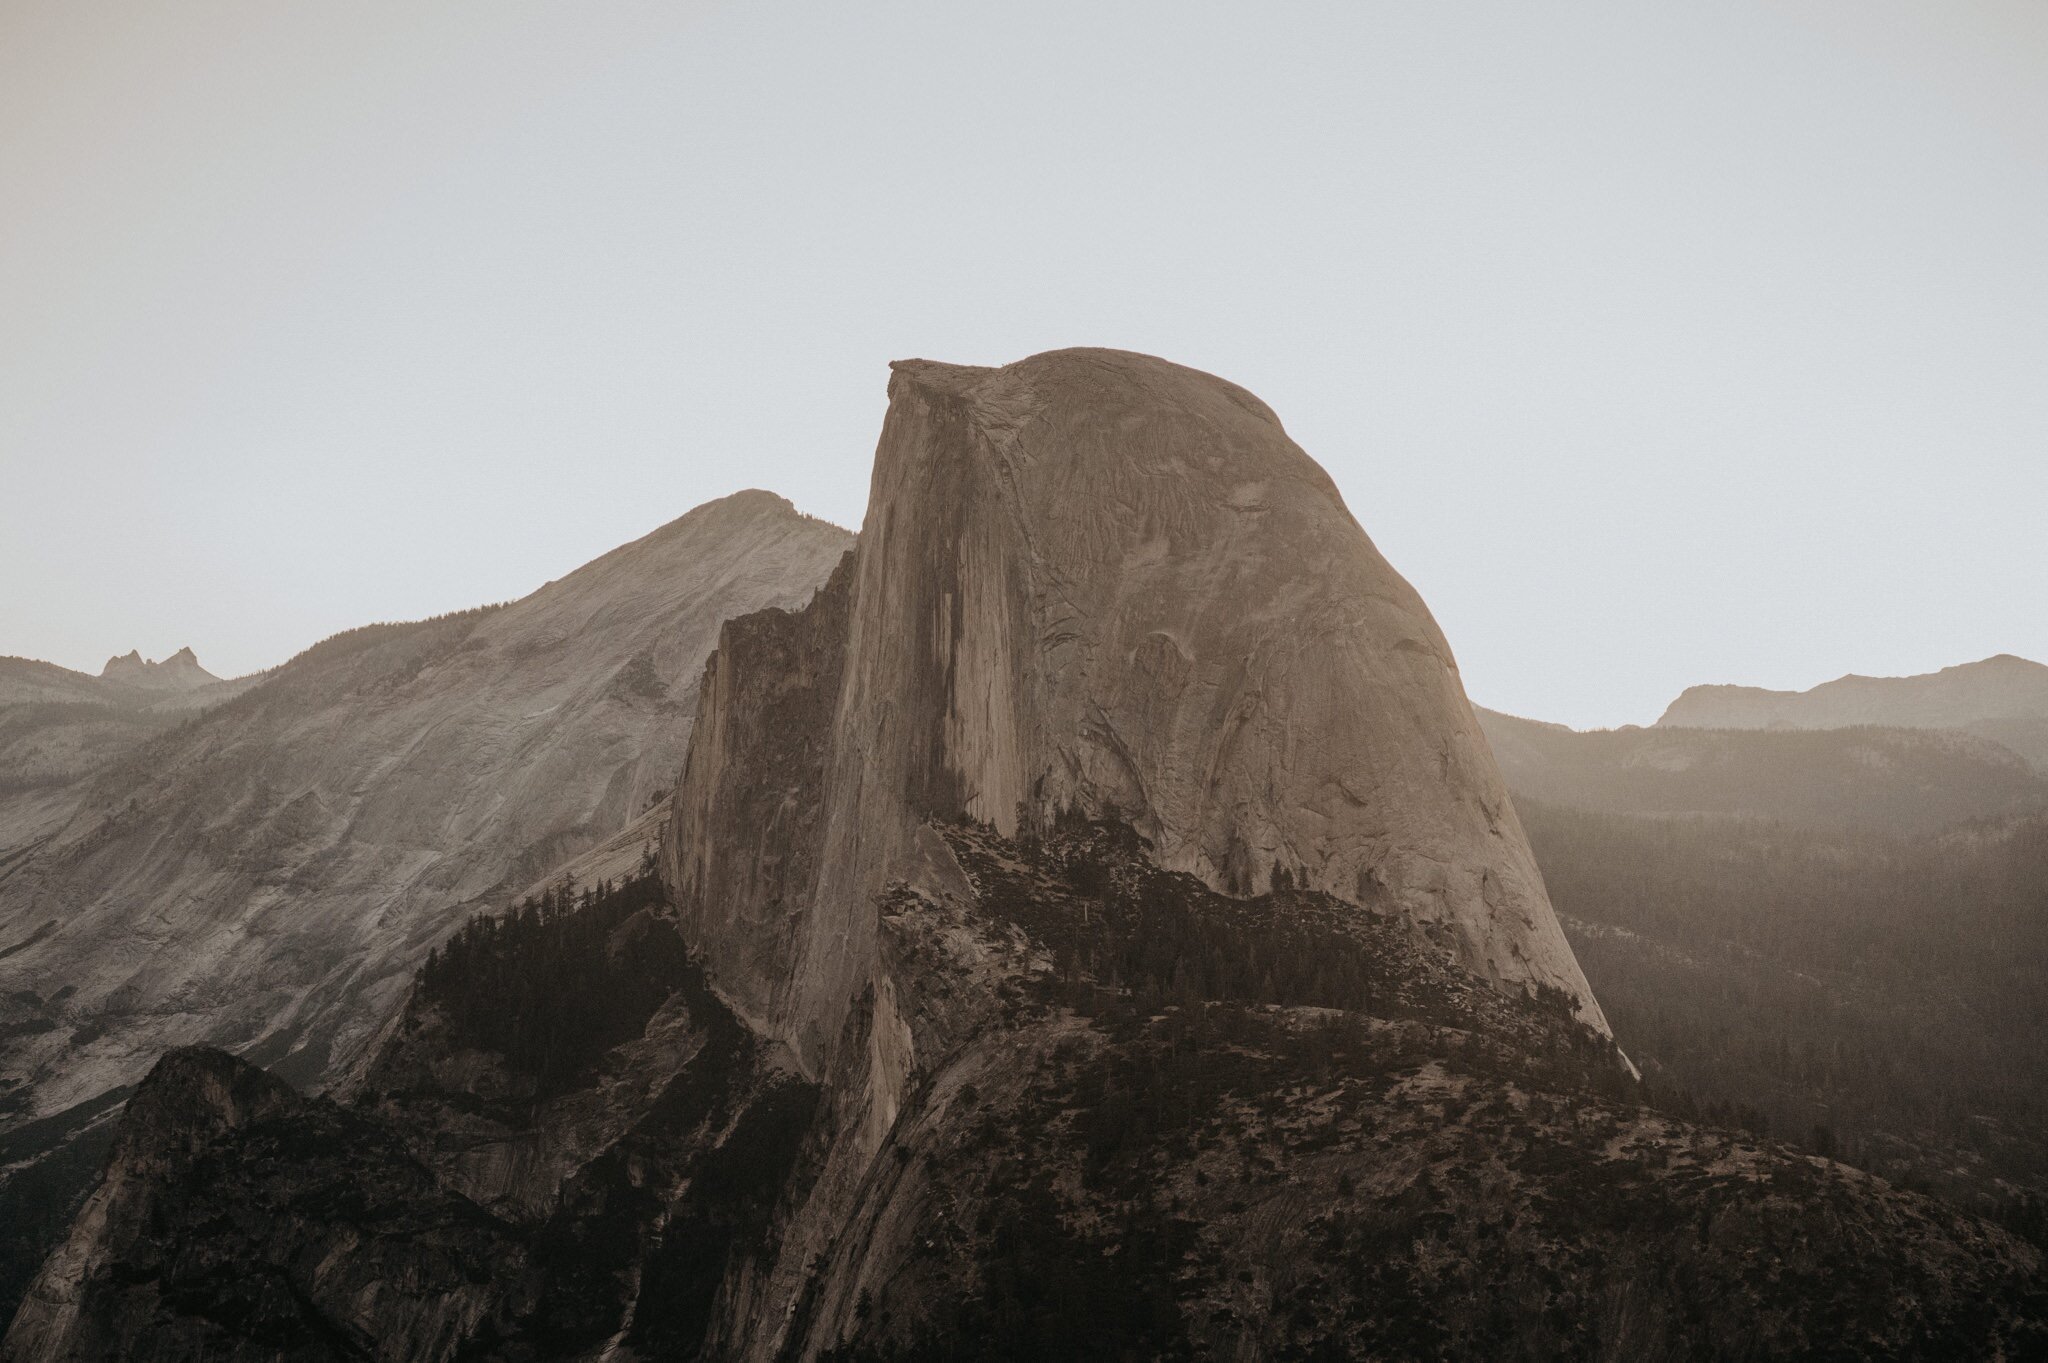 Yosemite National Park elopement photos at Glacier Point during sunrise with view of Half Dome